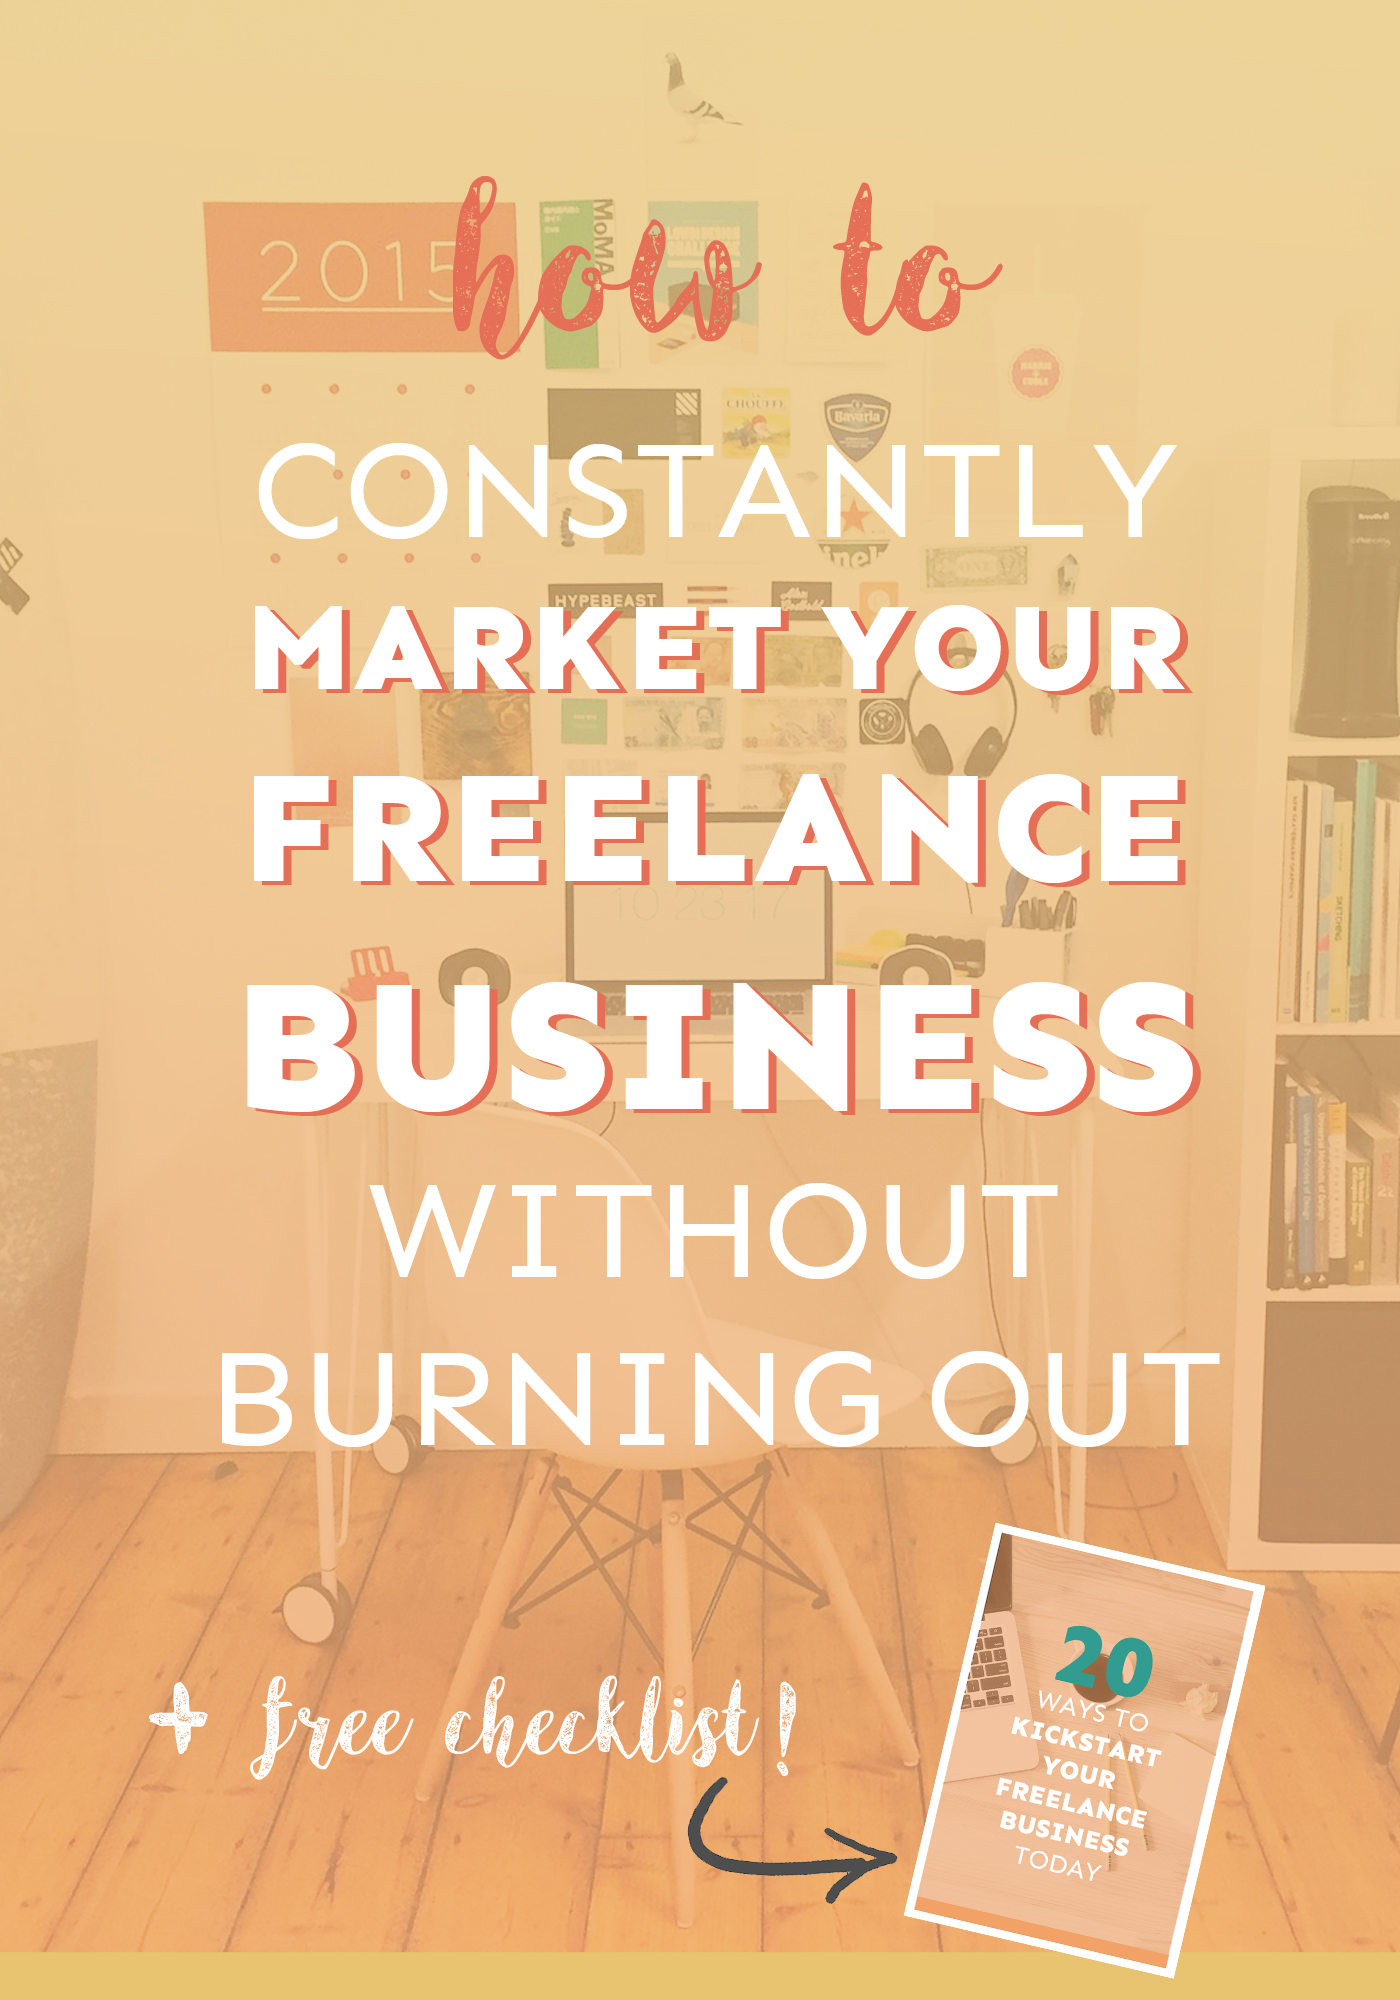 Don't know how to market your freelance business successfully? Here's a key strategy you can use to avoid burnout and consistently get clients! - Plus, there's a free worksheet to help you out.